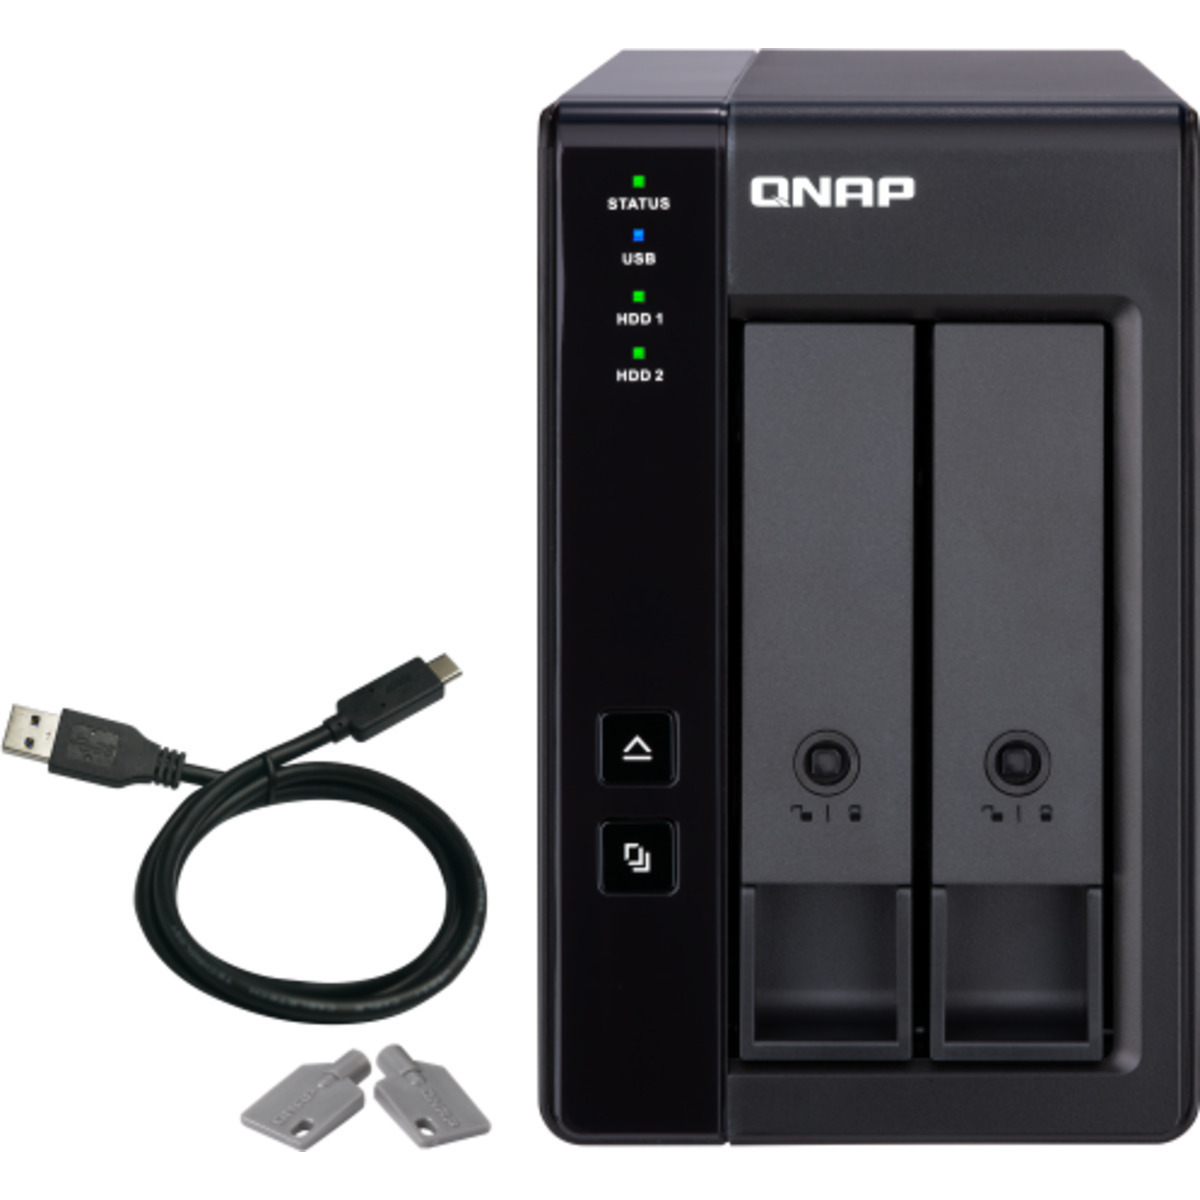 buy $343 QNAP TR-002 External Expansion Drive 4tb Desktop Expansion Enclosure 2x2000gb Seagate BarraCuda ST2000DM008 3.5 7200rpm SATA 6Gb/s HDD CONSUMER Class Drives Installed - Burn-In Tested - ON SALE - nas headquarters buy network attached storage server device das new raid-5 free shipping usa TR-002 External Expansion Drive